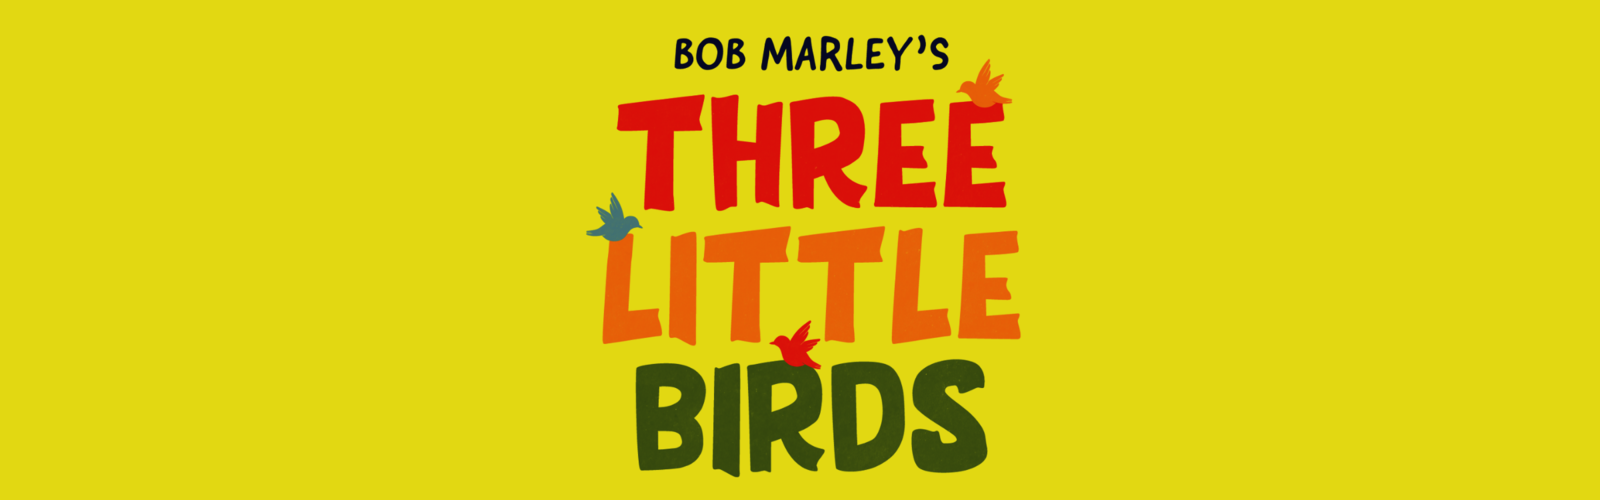 Bob Marley’s Three Little Birds Sensory Friendly - First Stage Children's Theater - Variety - the Children's Charity of Wisconsin